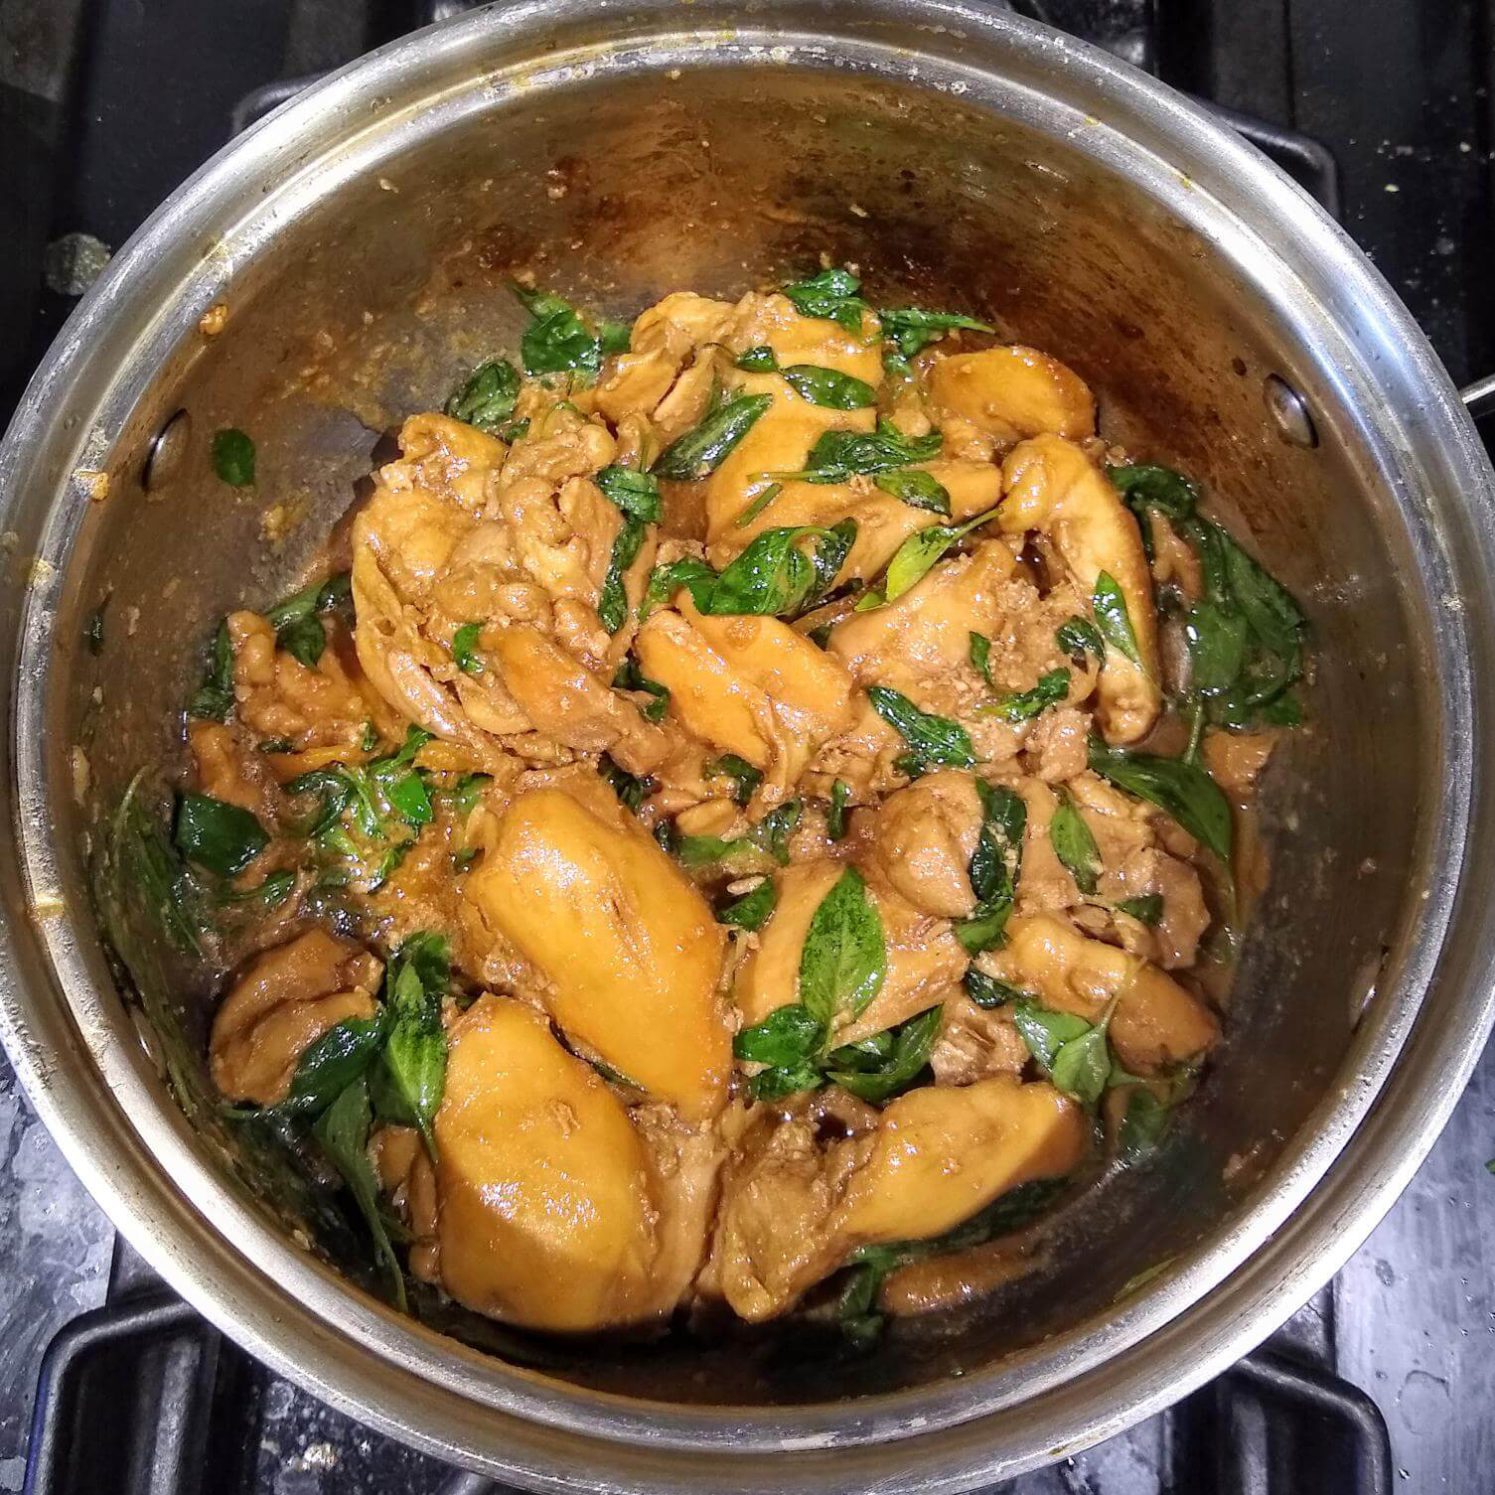 Basil Added to the Chicken